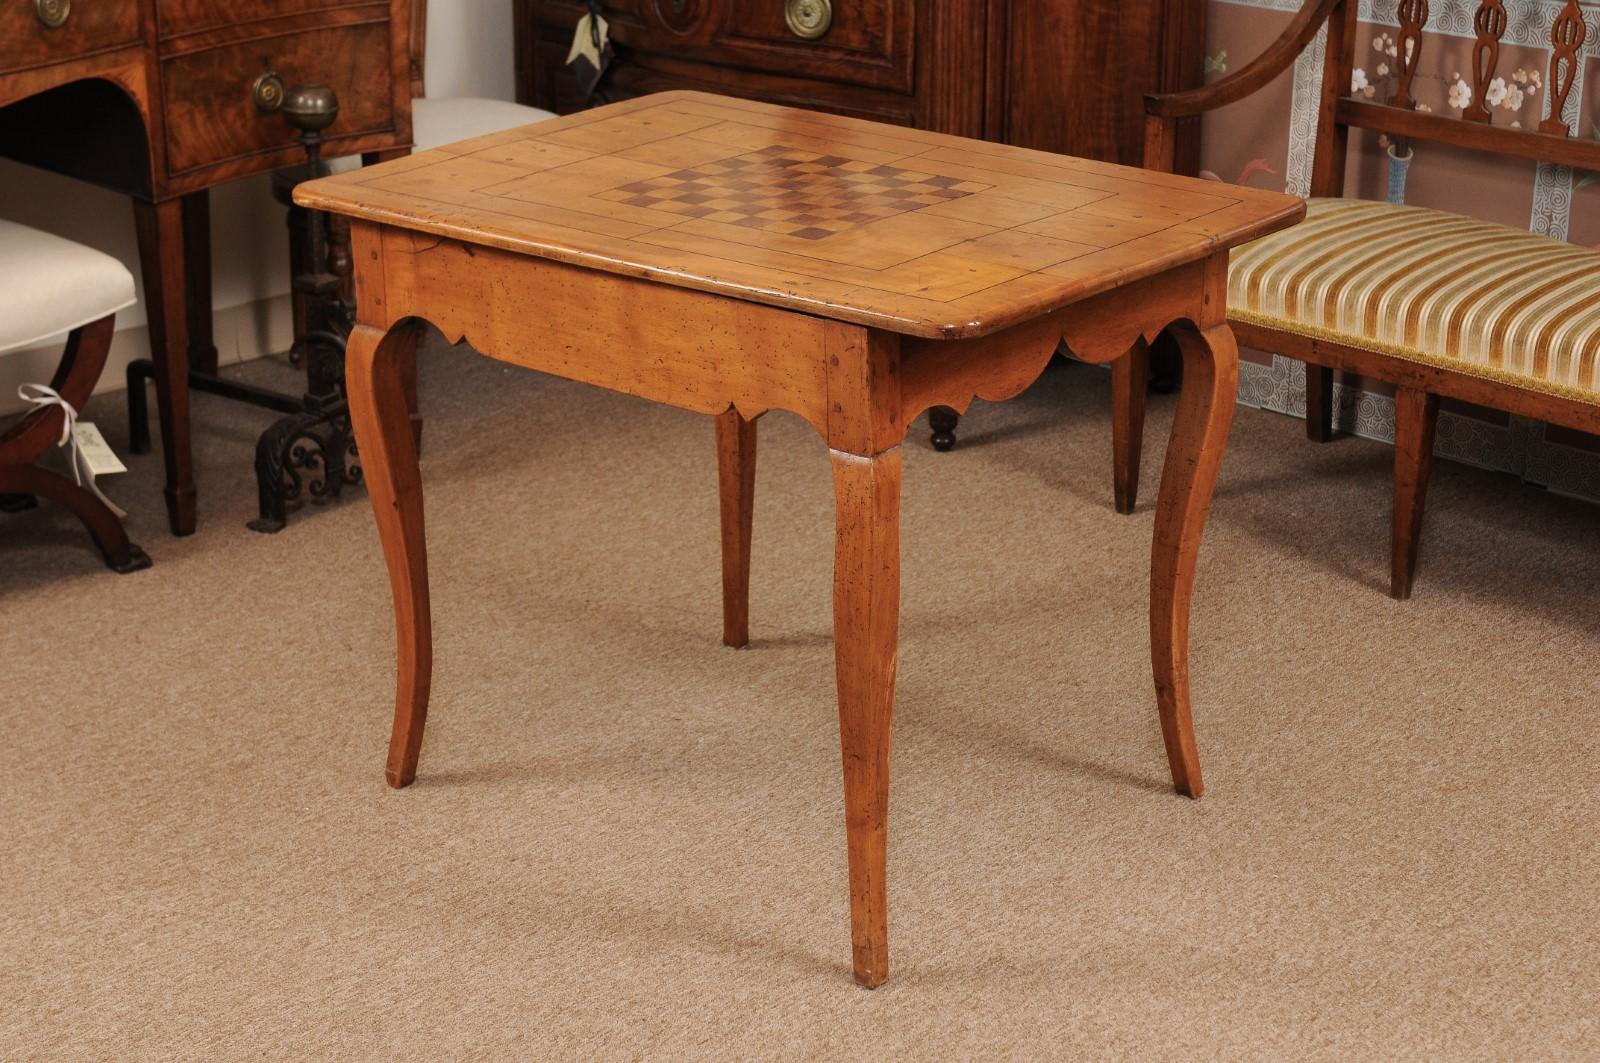 French Louis XV Fruitwood Parquetry Inlaid Table, Mid-18th Century For Sale 6